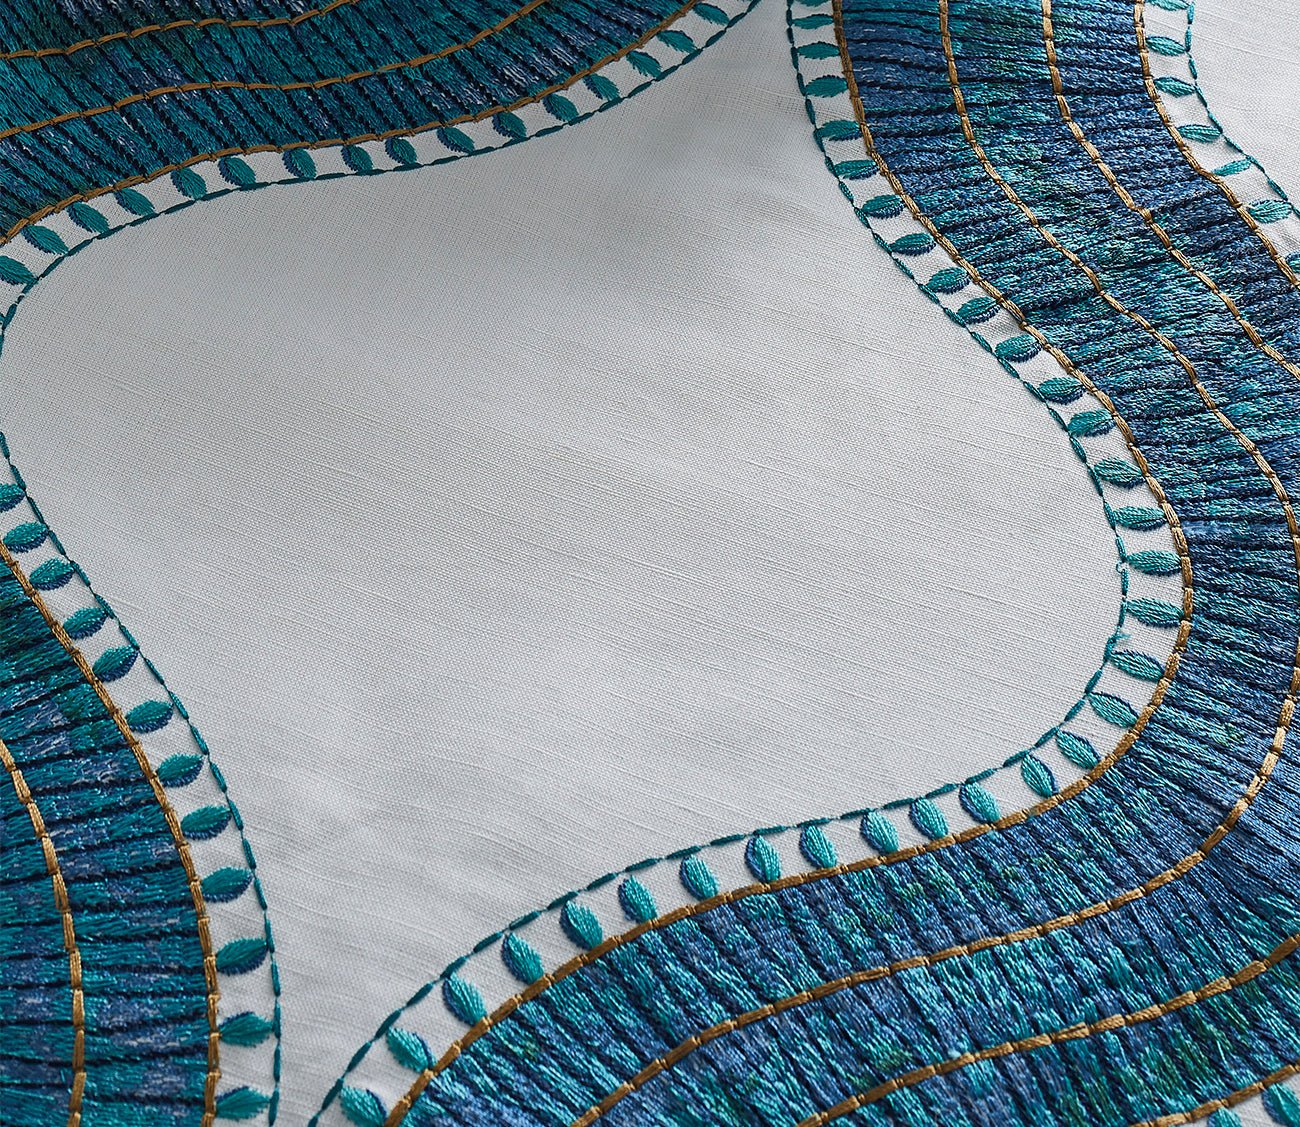 Egyptian Collar Embroidered Throw Blanket by Ann Gish